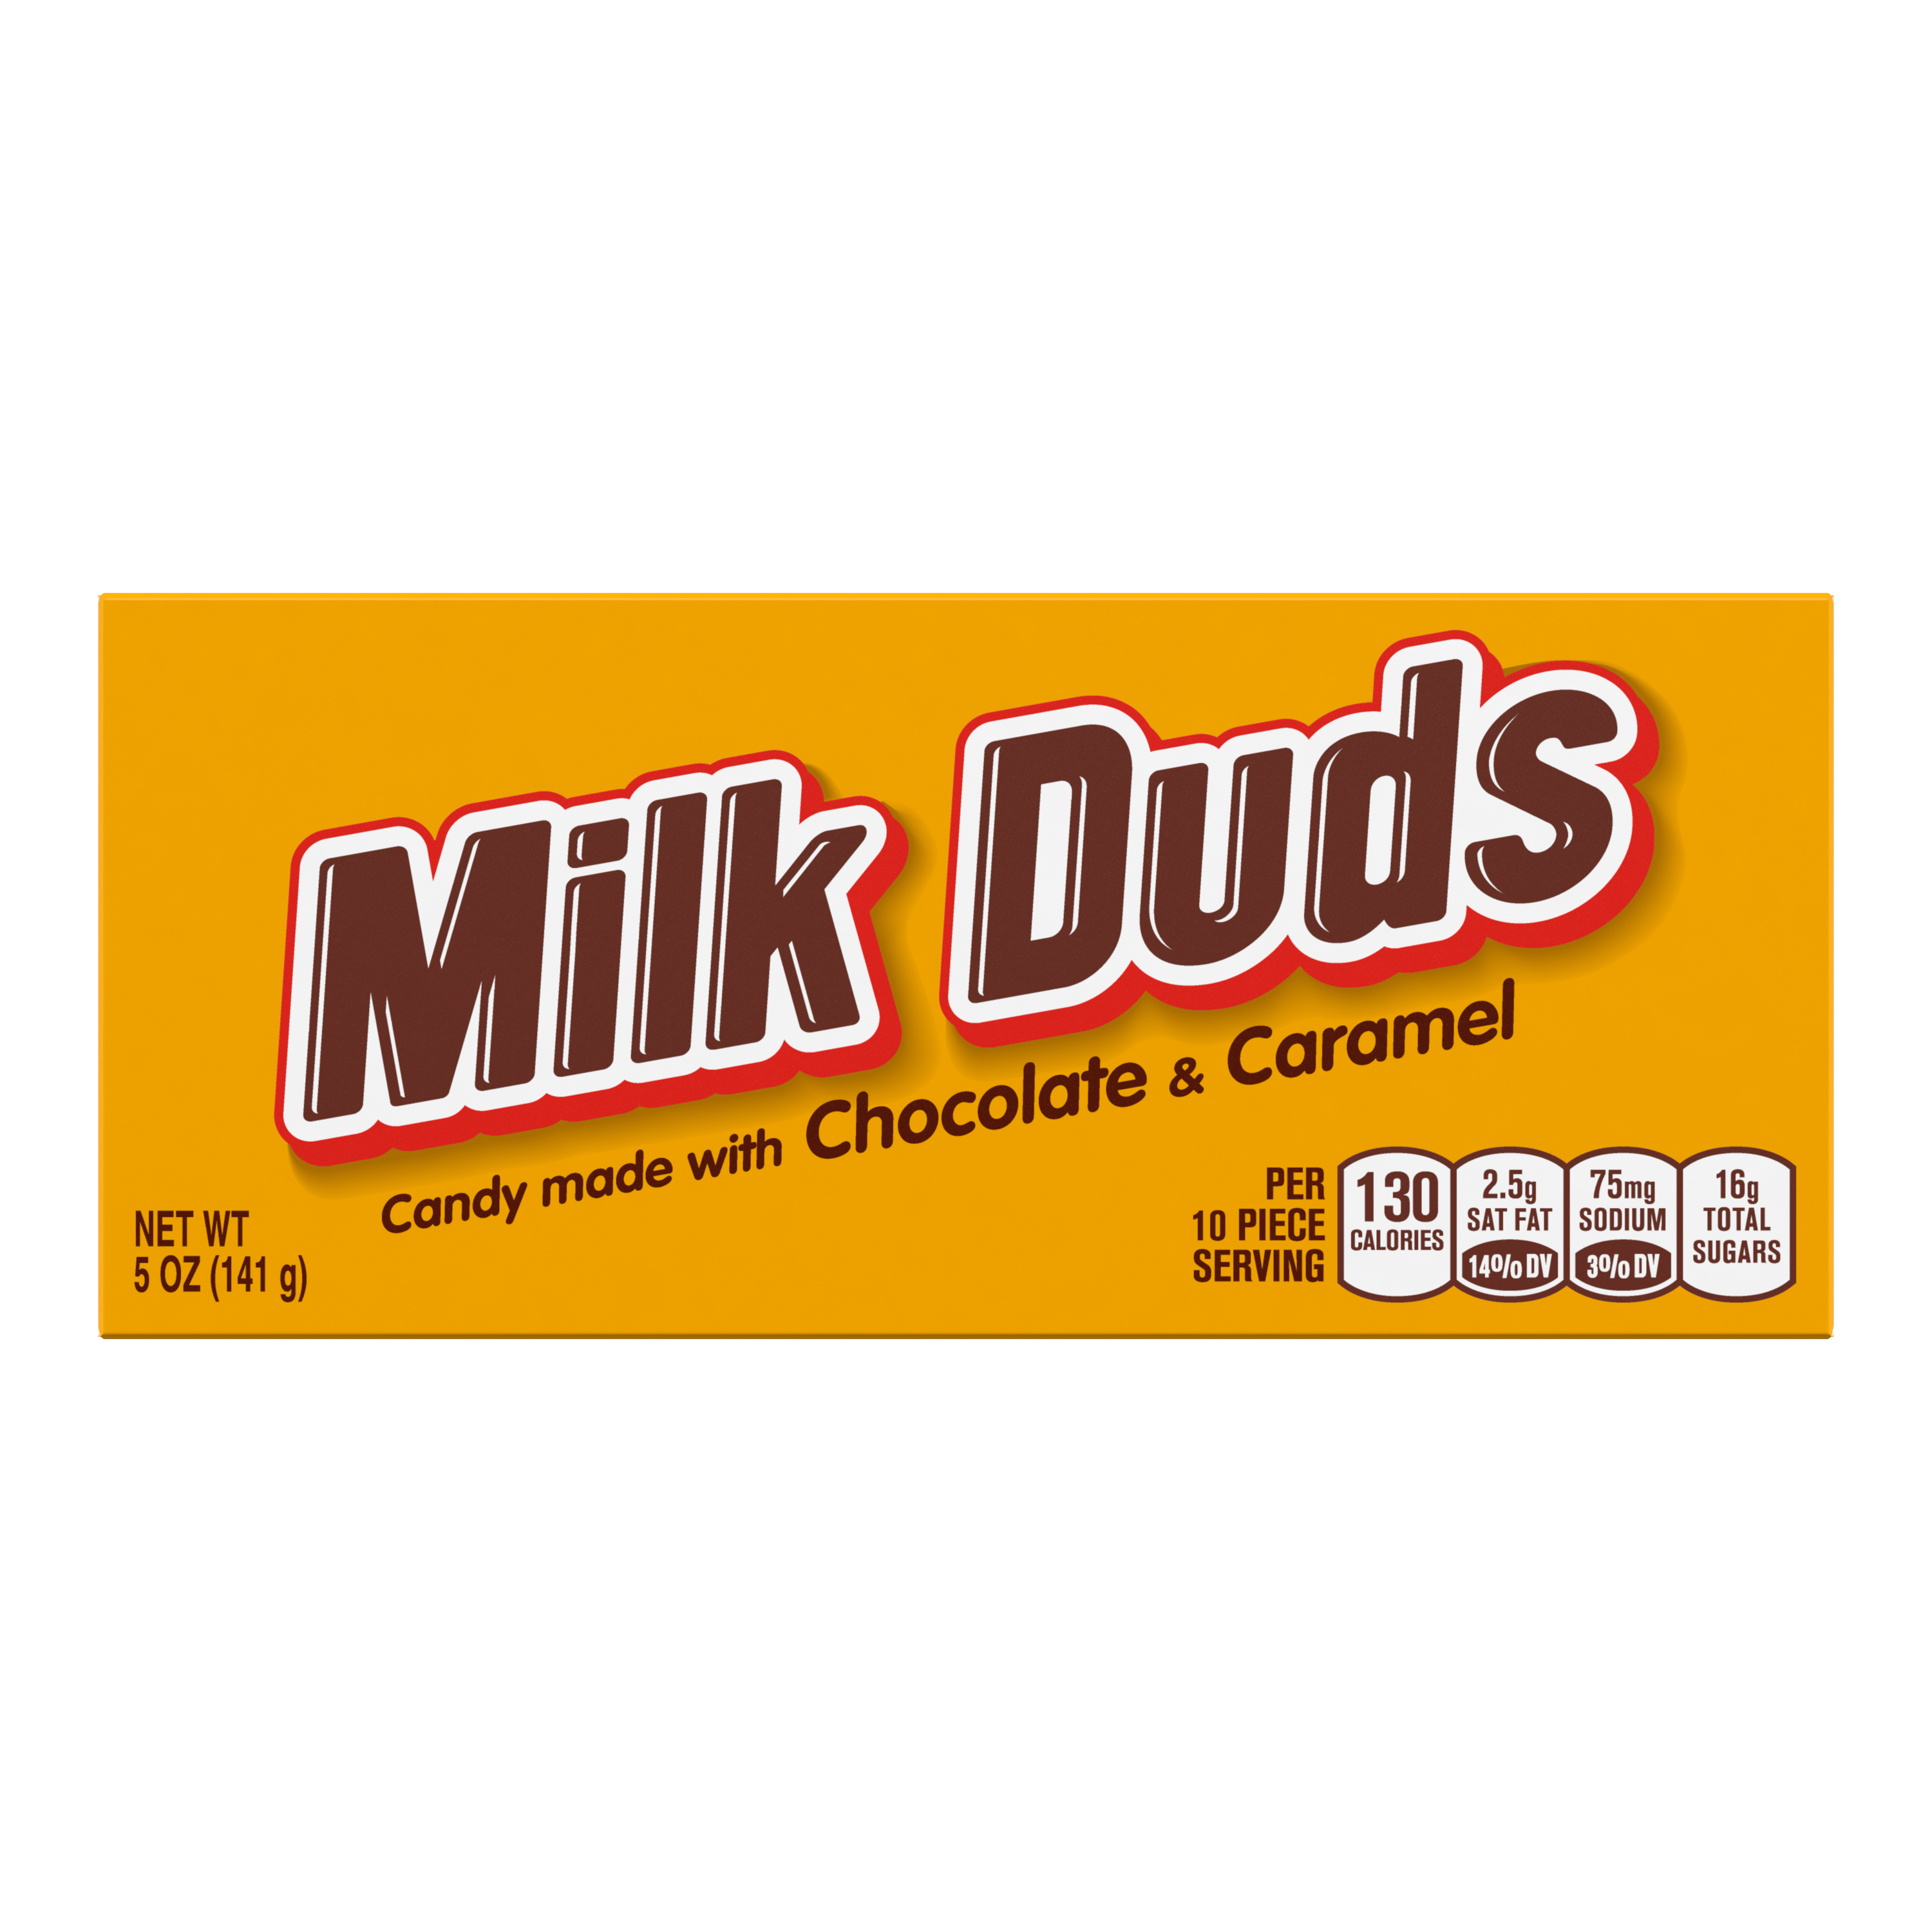 MILK DUDS Chocolate and Caramel Candy, 5 oz box - Front of Package